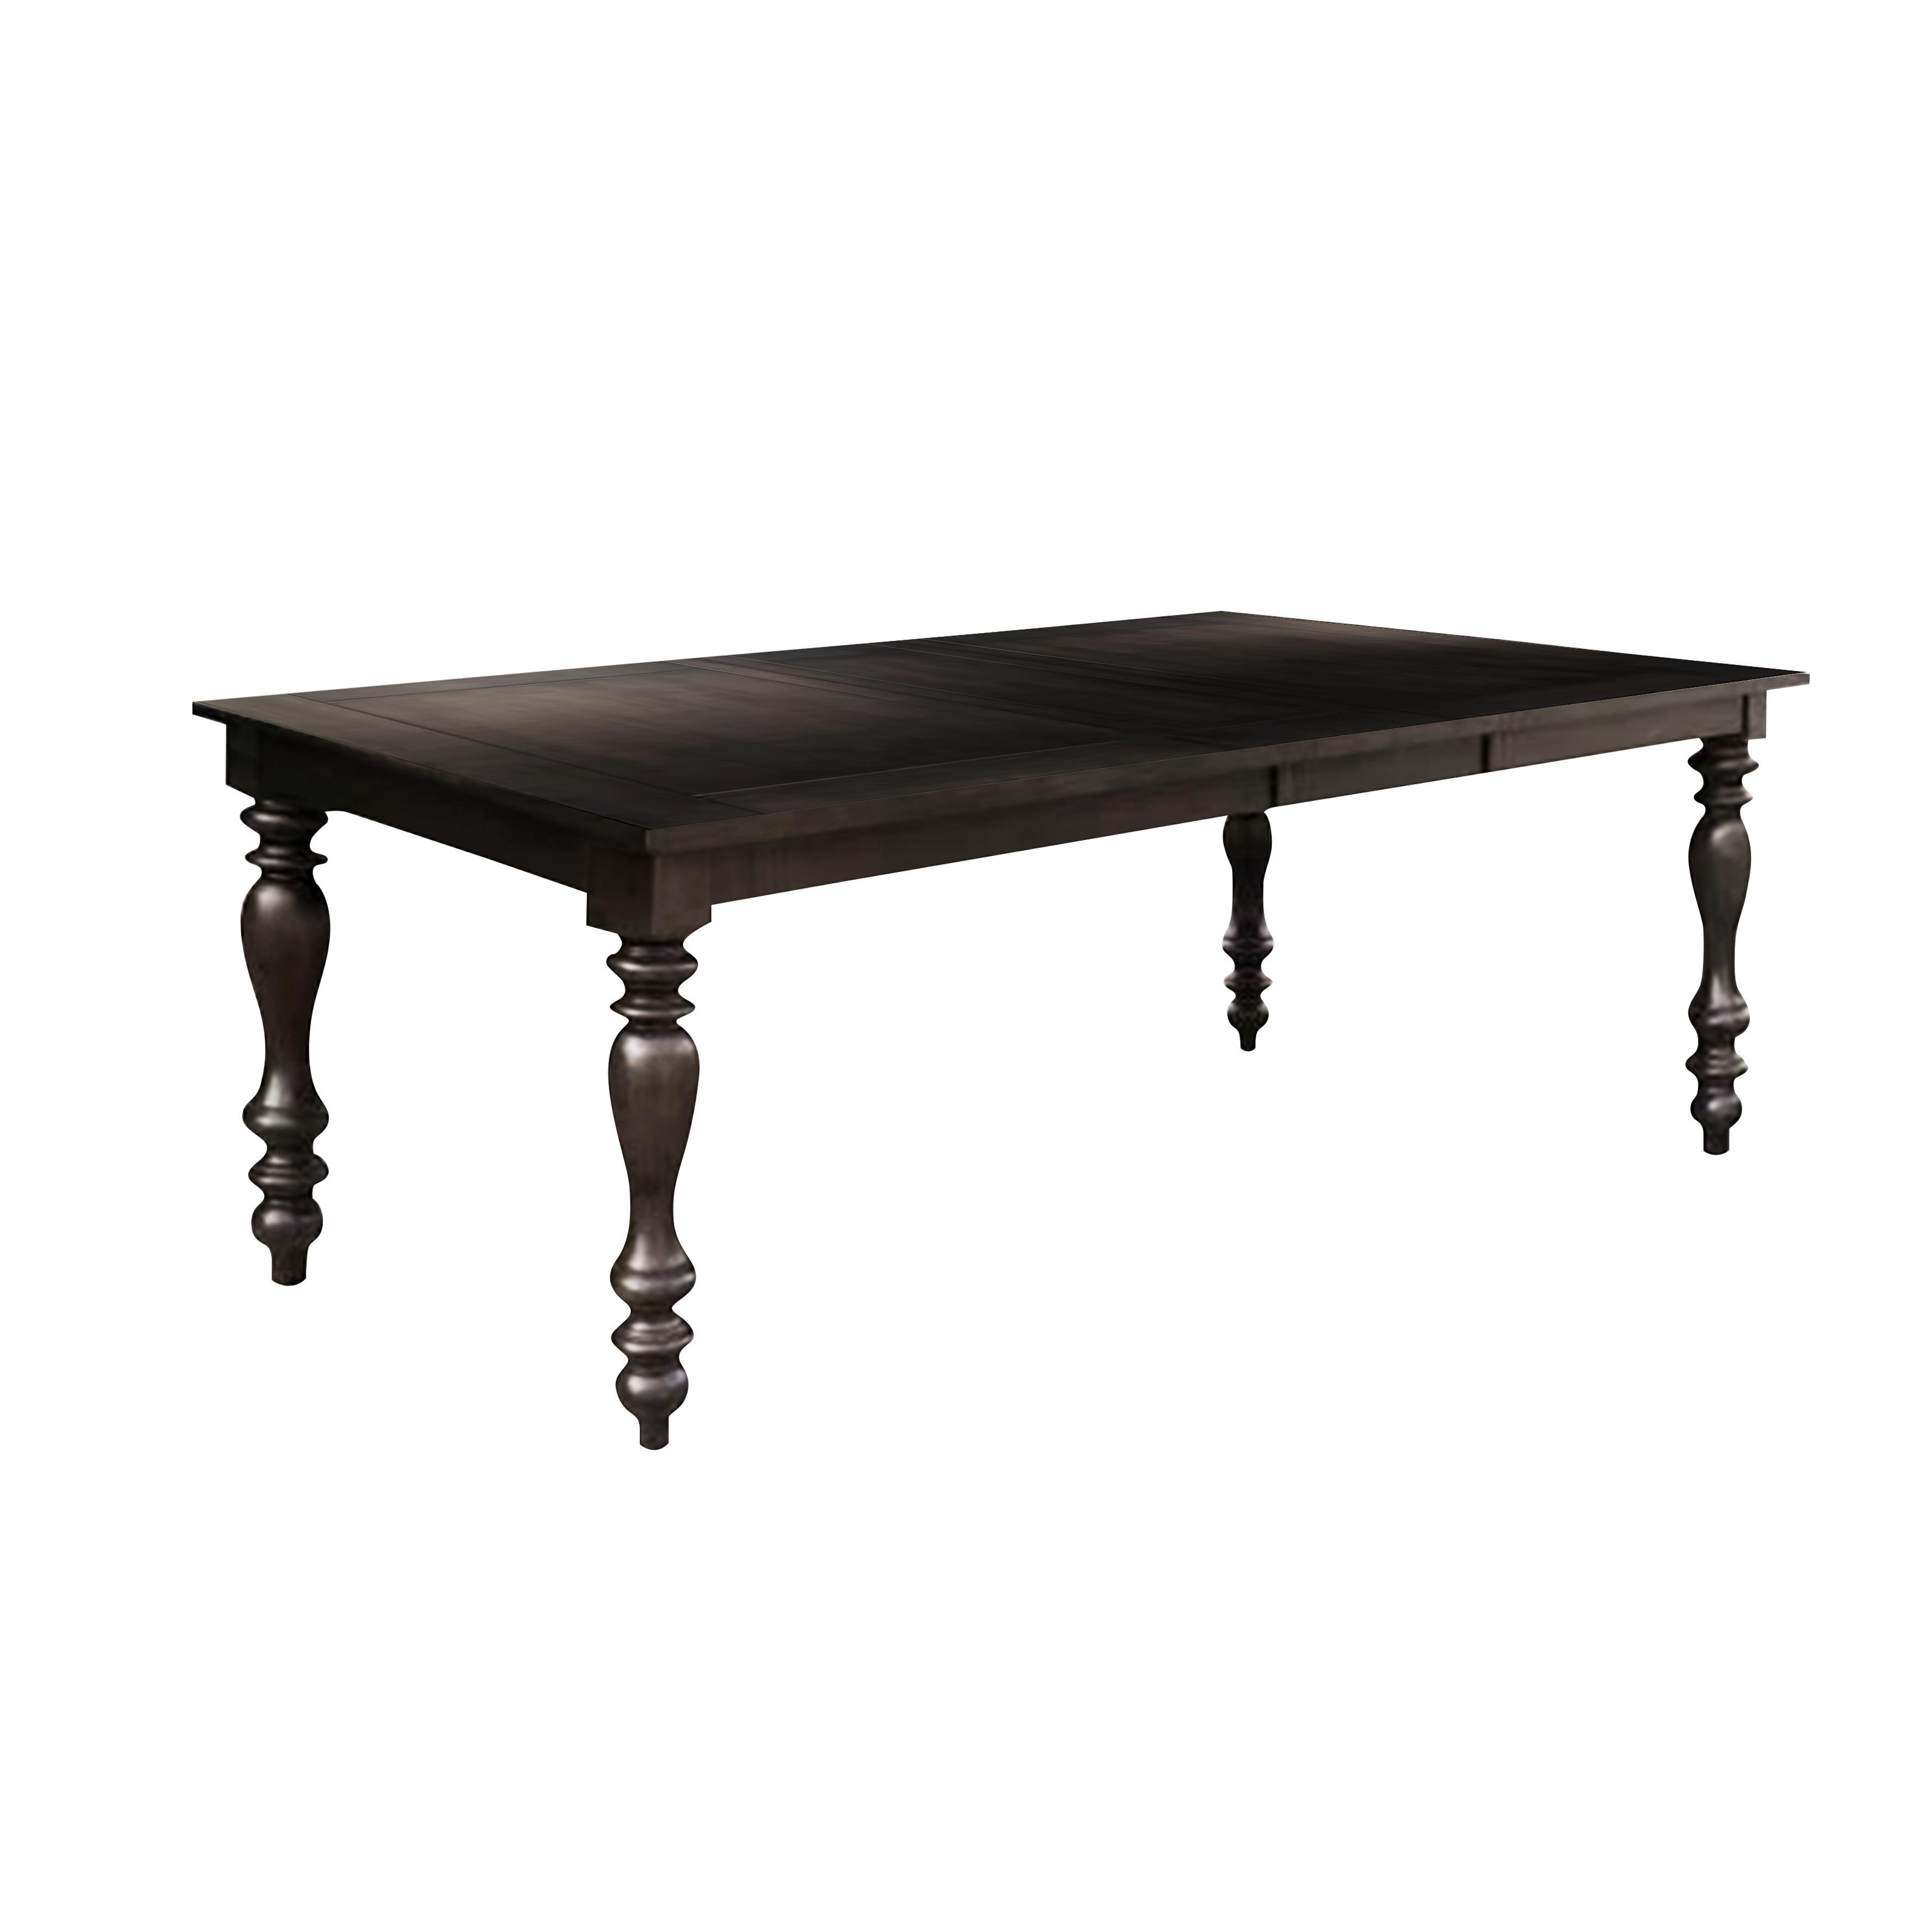 Transitional Dining Table 1718GY-90 Begonia 1718GY-90 in Grayish Brown 